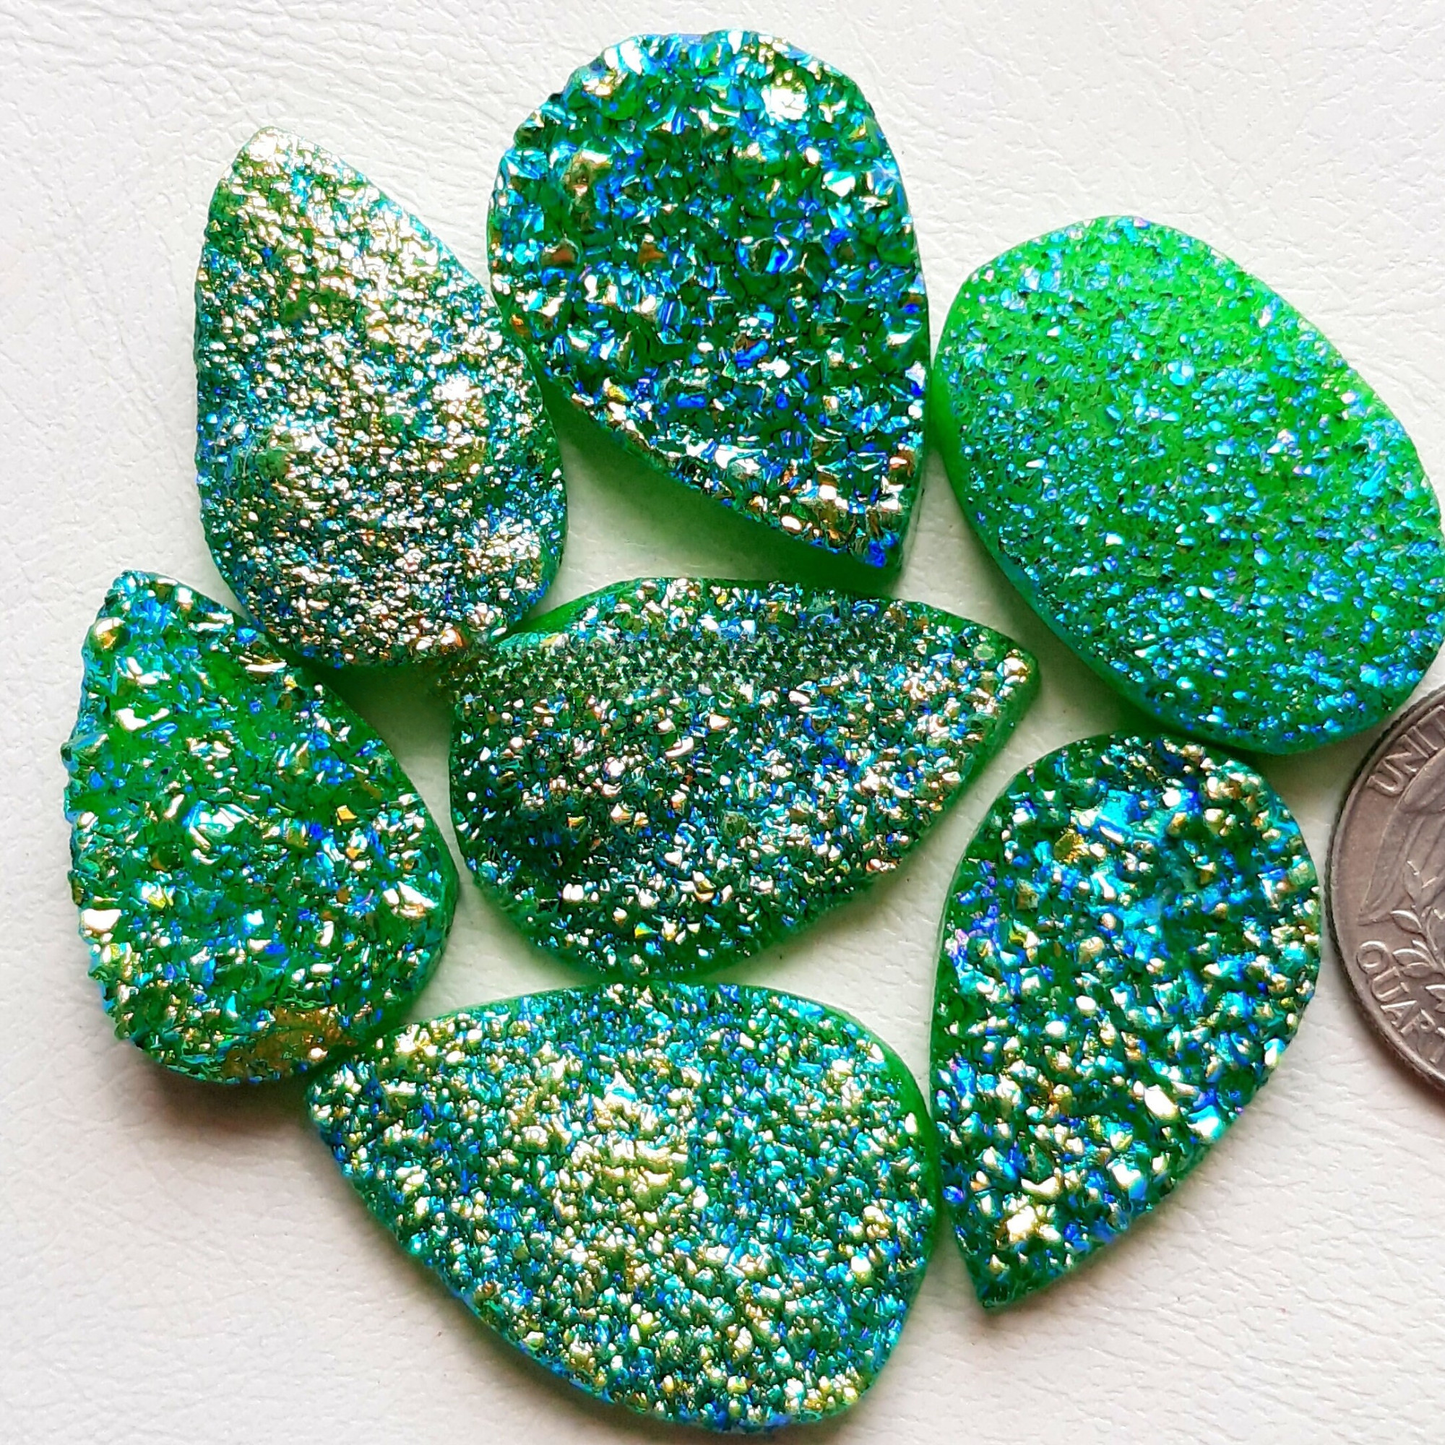 Green Color Titanium Coated Druzy Stone Cabochon Wholesale Lot Gemstone By Pieces With Different Shapes And Sizes Used For Jewelry Making Natural - (Natural-Coated)